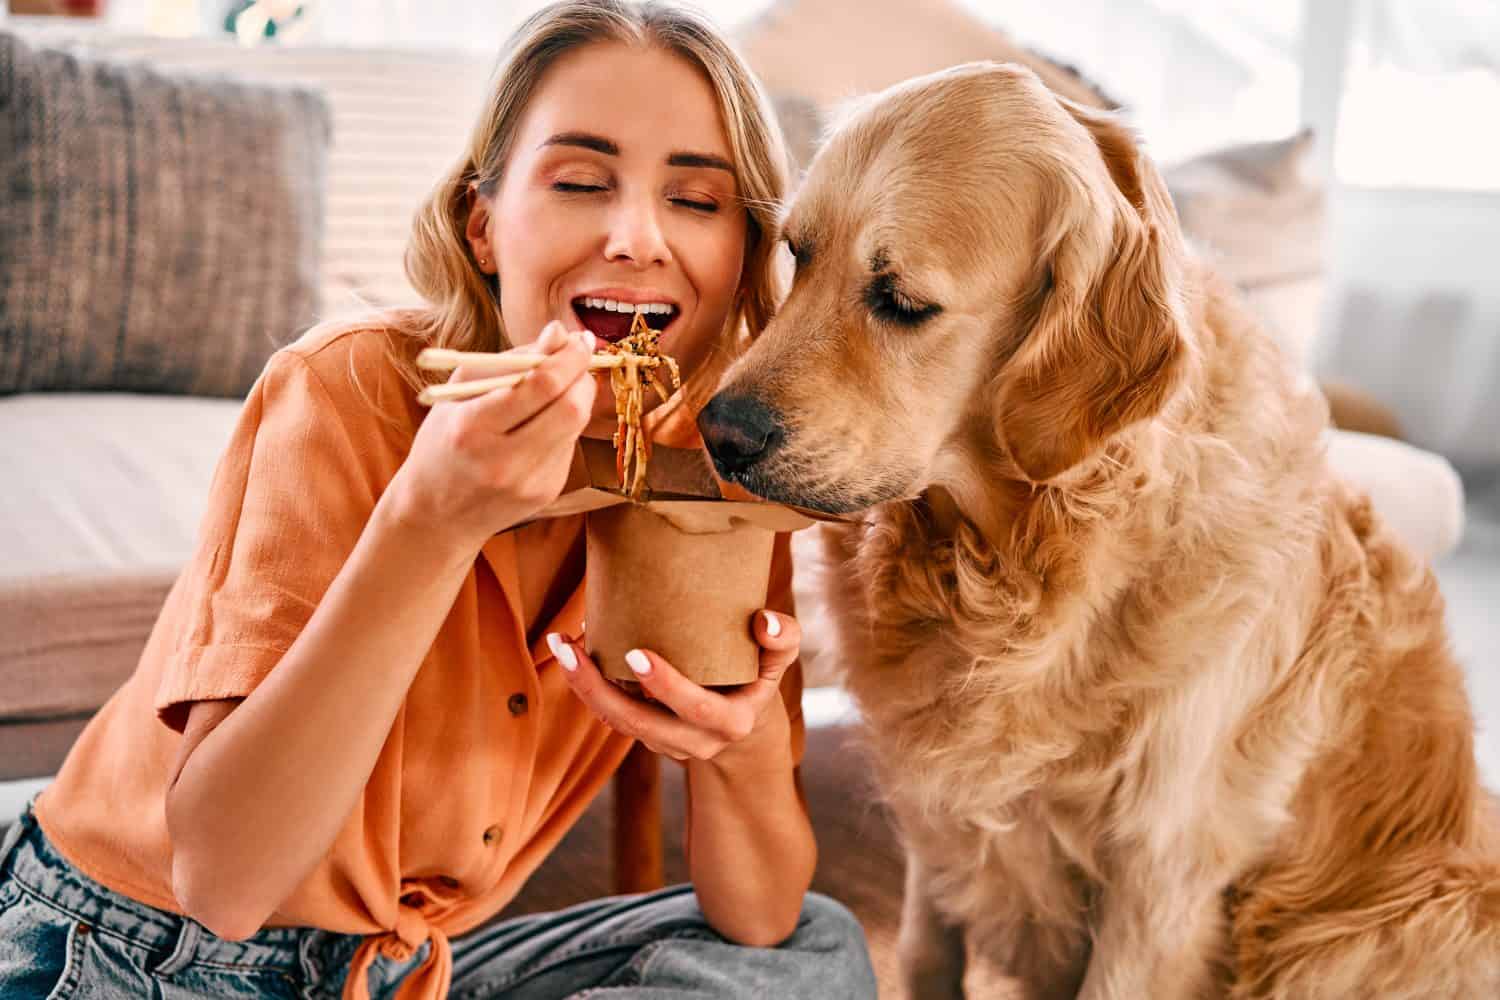 Golden retriever eagerly licking paper box with chinese noodles being eating by young woman. Female pet owner sharing food with lovely furry friend at cozy apartment.                               